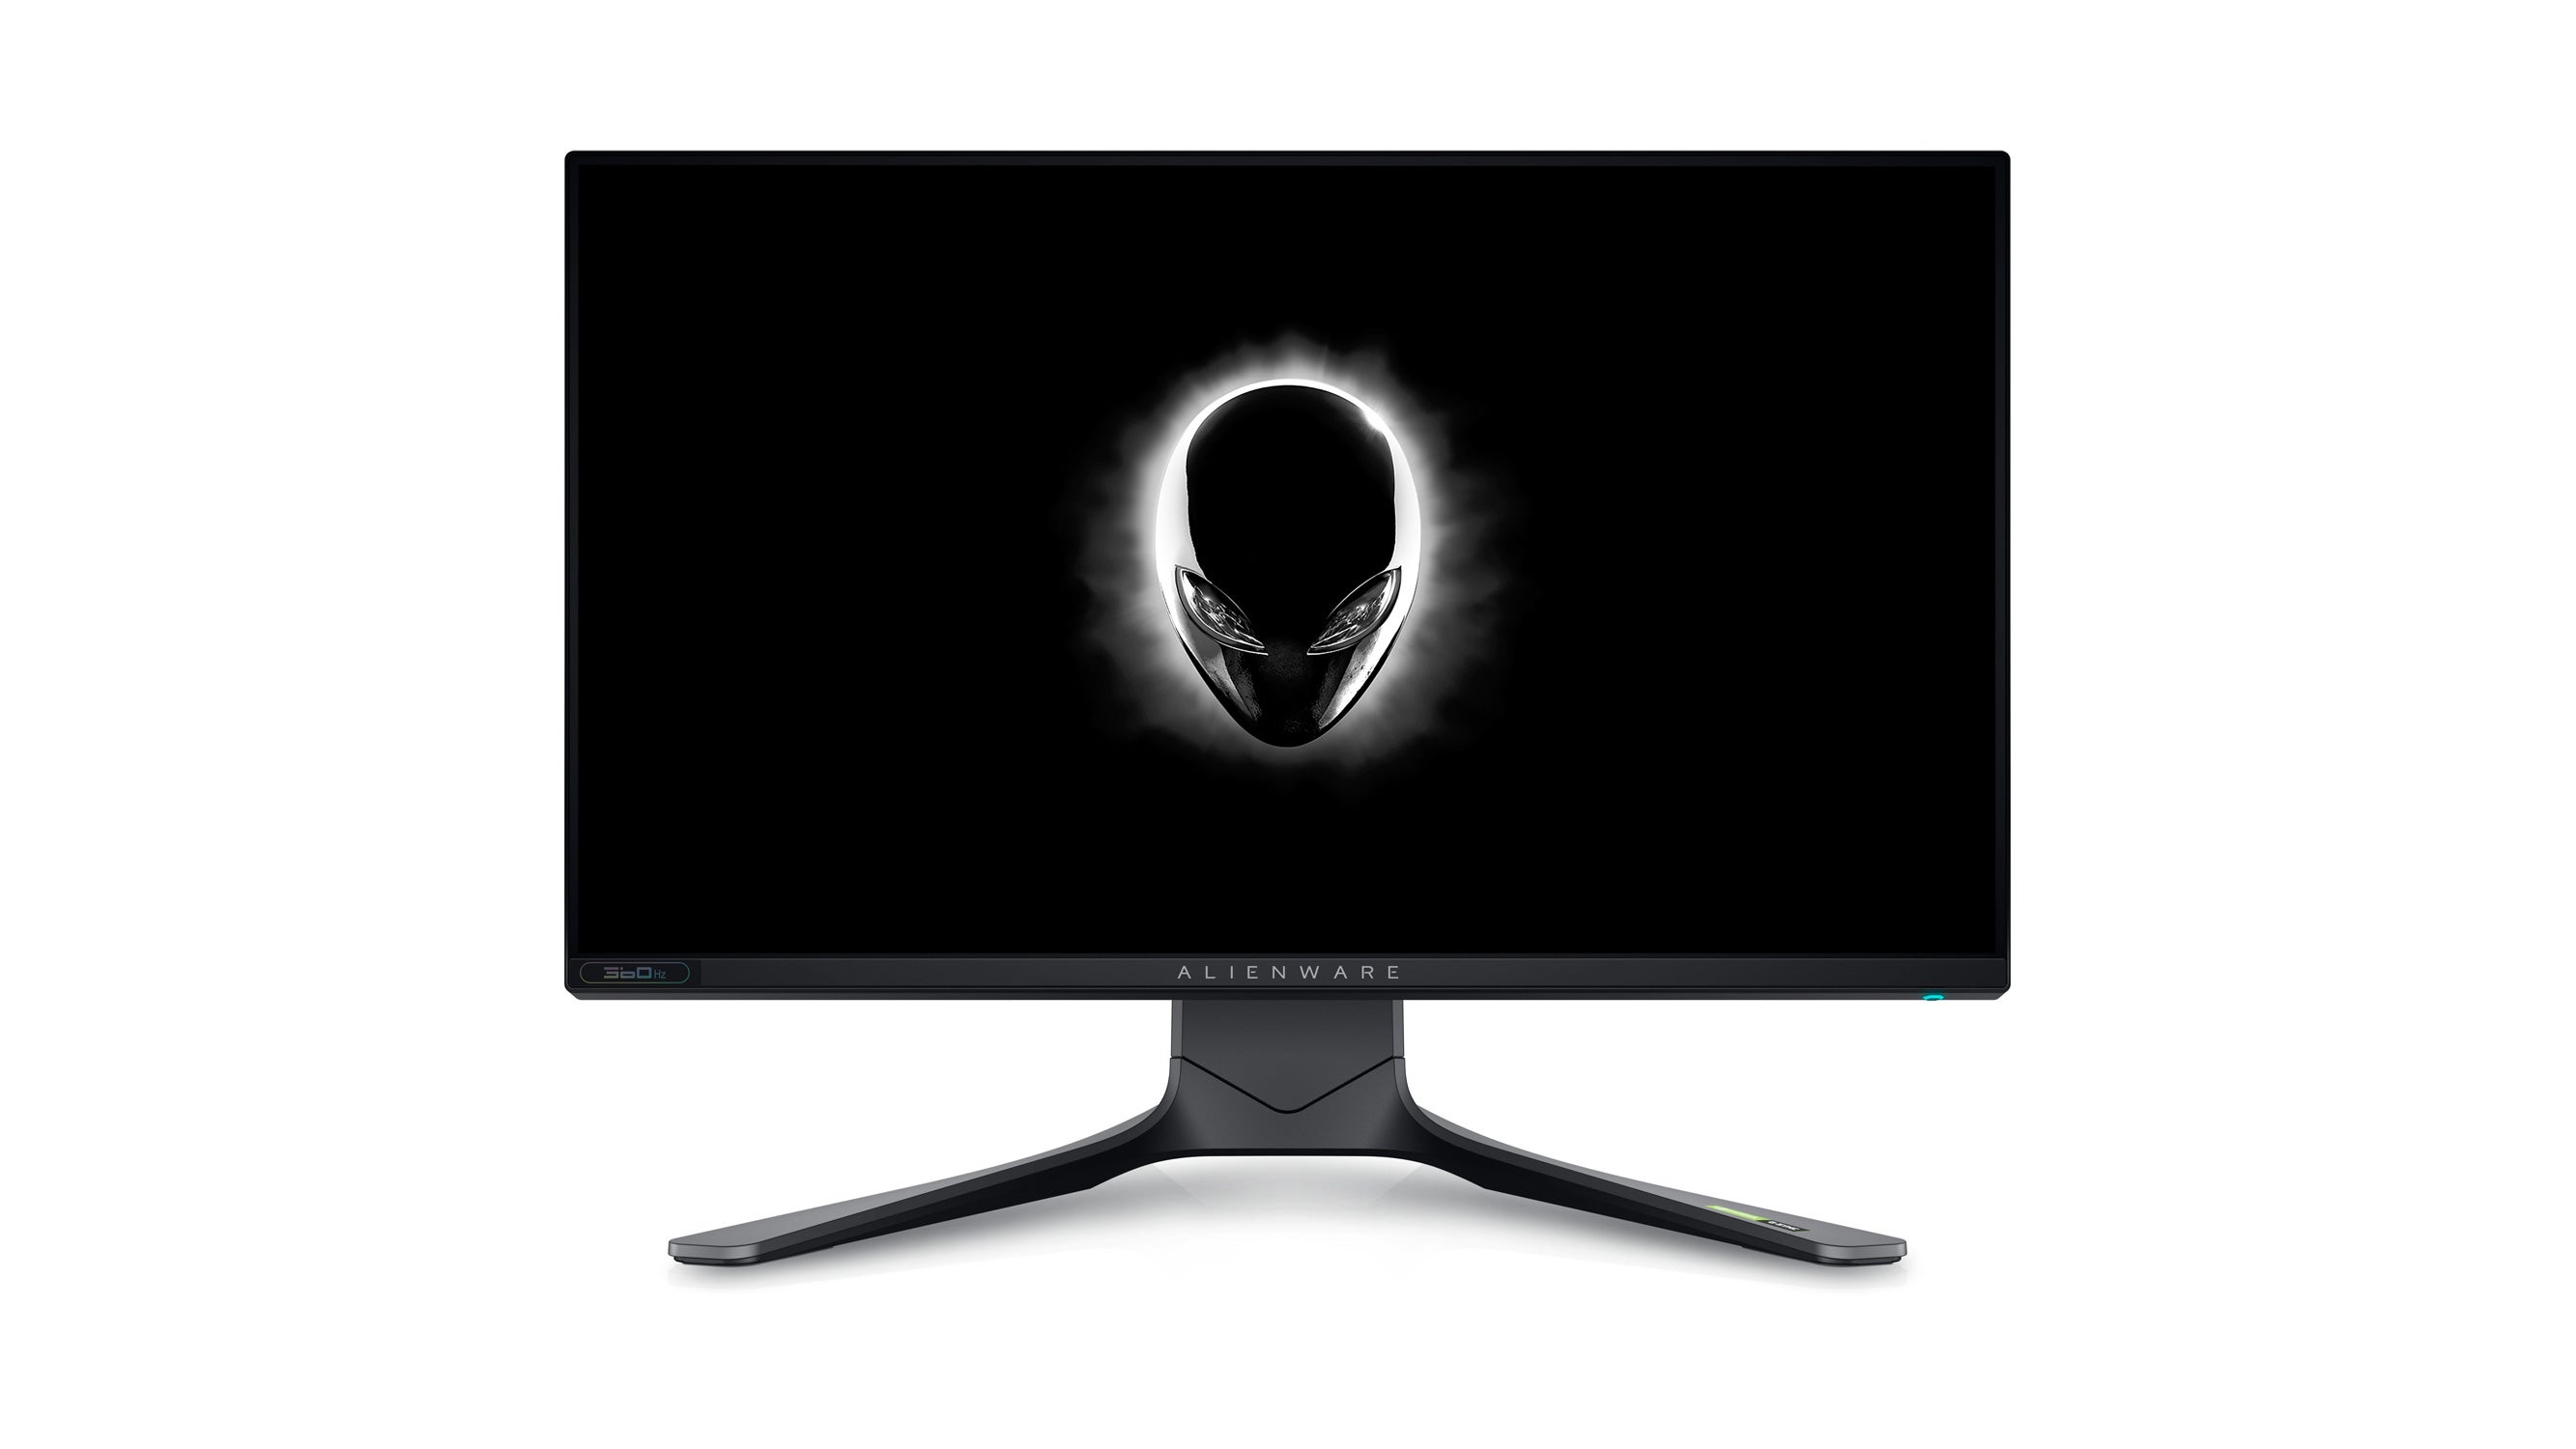 This 360Hz Dell Alienware monitor is just over $300 thanks to an